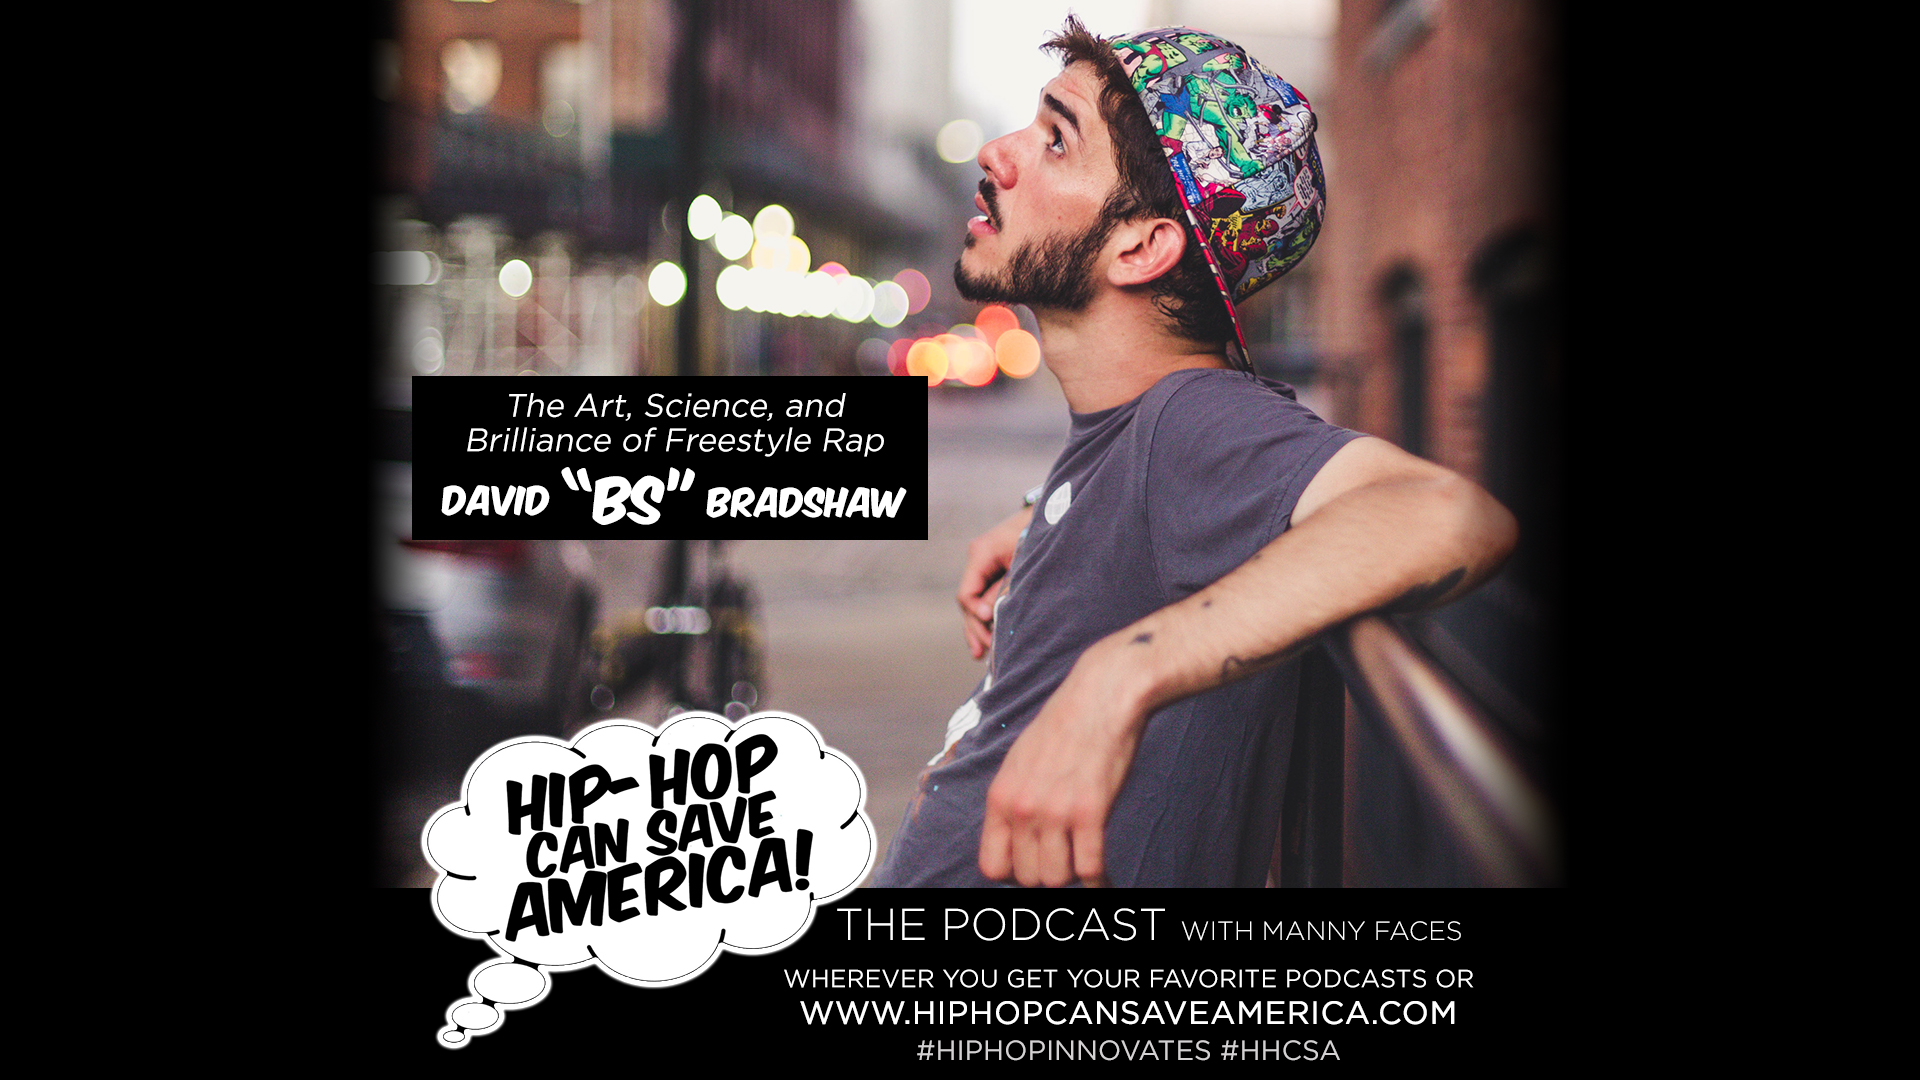 The art, science and universal applications of Freestyle Rap with David "BS" Bradshaw